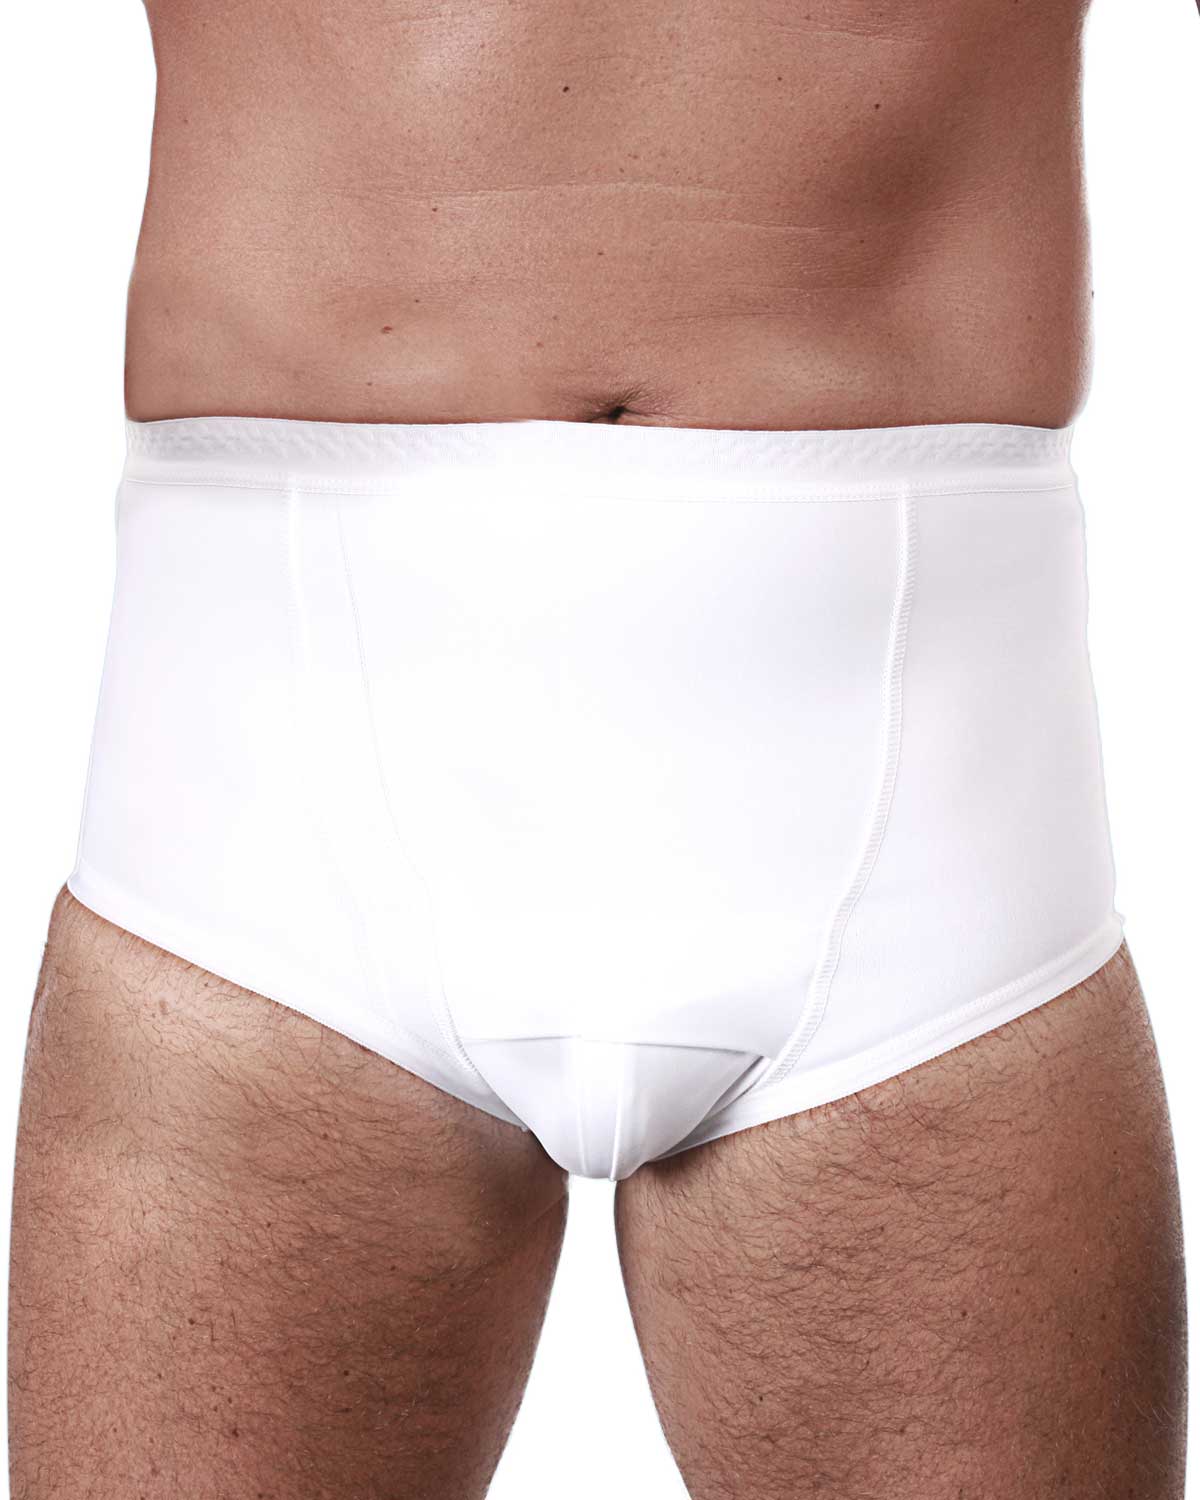 CUI Mens Hernia Low Waist Support Girdle Brief - 1 each, LARGE, WHITE-1